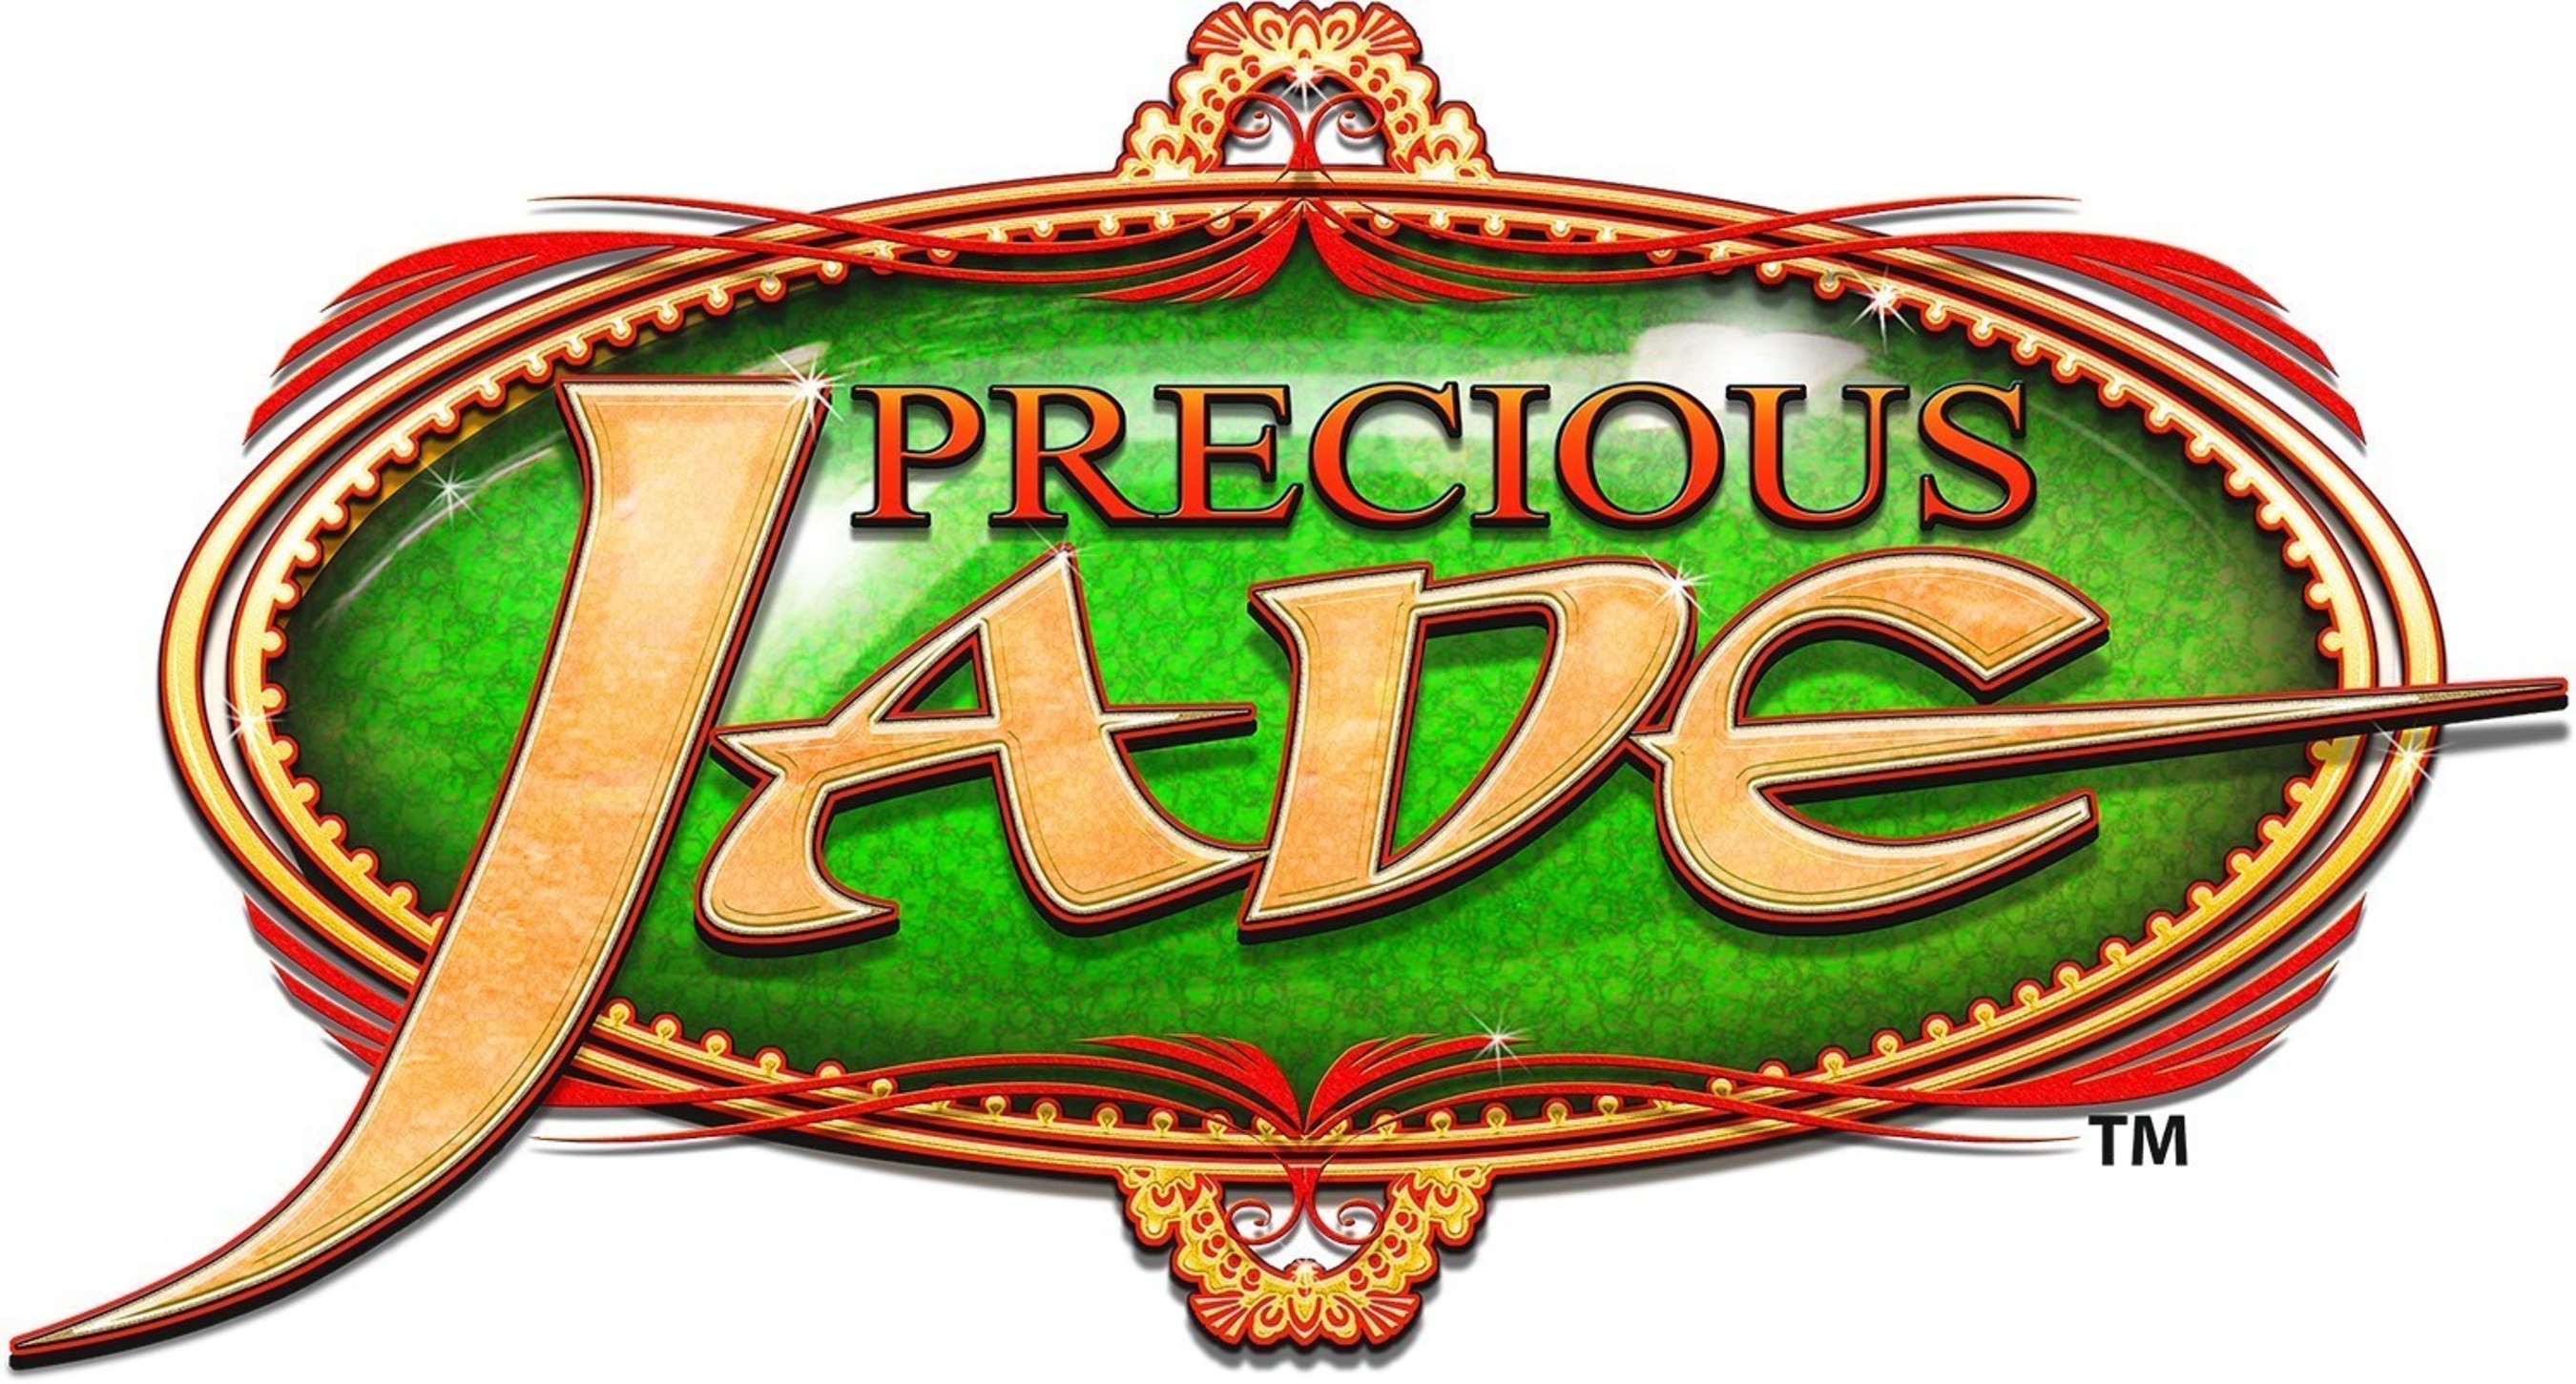 Angel of the Winds Casino patrons will explore a land of fantastical beauty with the dazzling warrior Precious Jade(TM), who leads players through a journey of exciting Free Games with re-triggers and abundant Mystery Stacks.